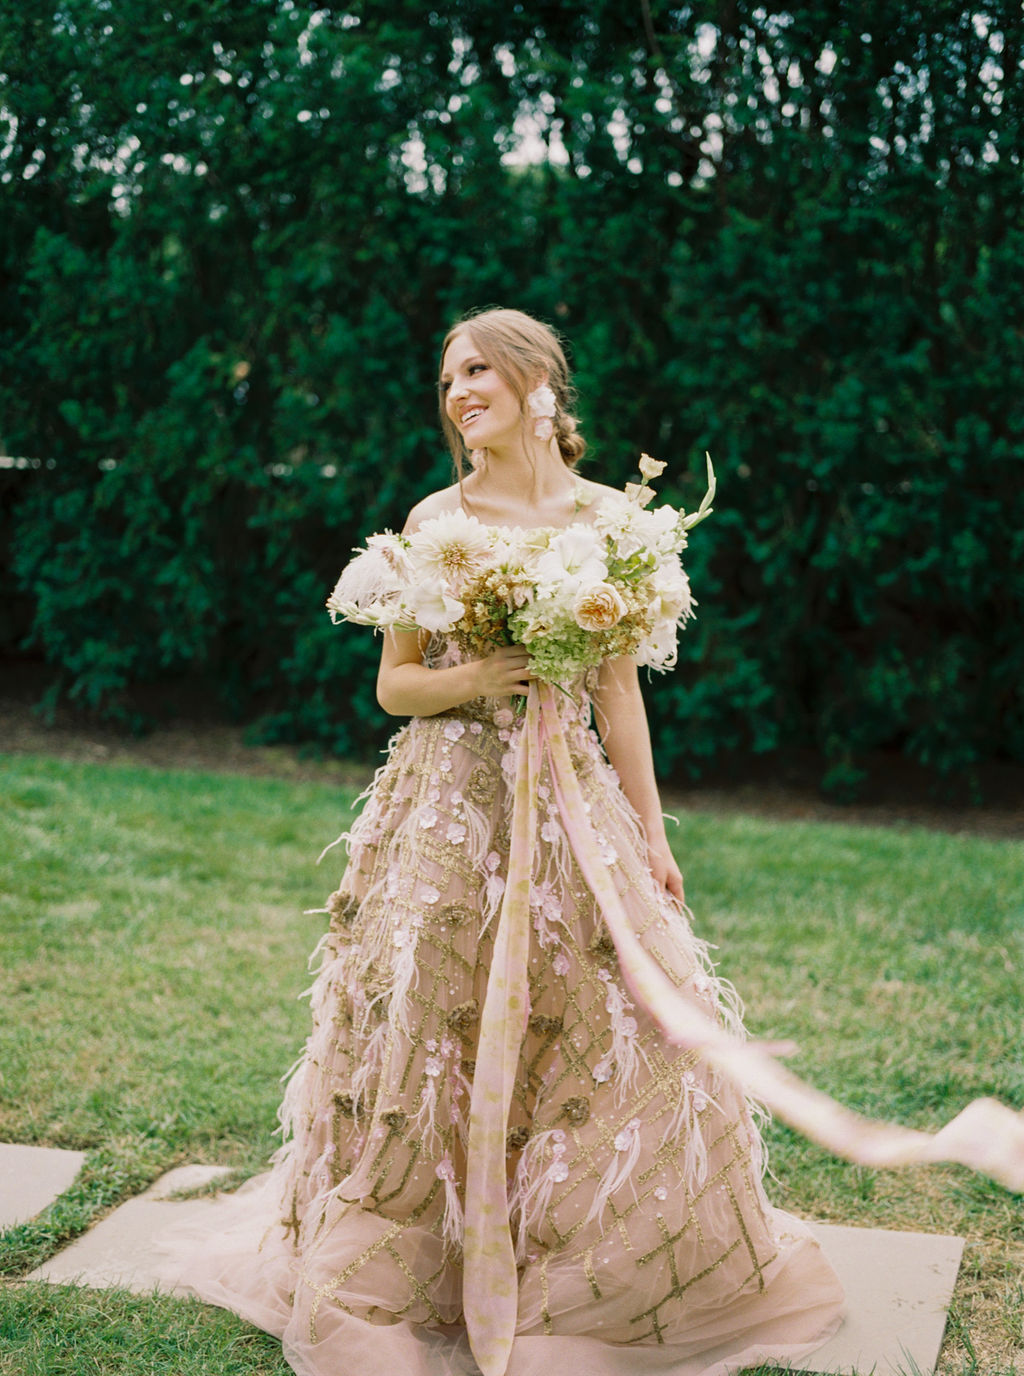 Spring Wedding Fashions and Design at Dover Hall Estate - Lustre Theory ...